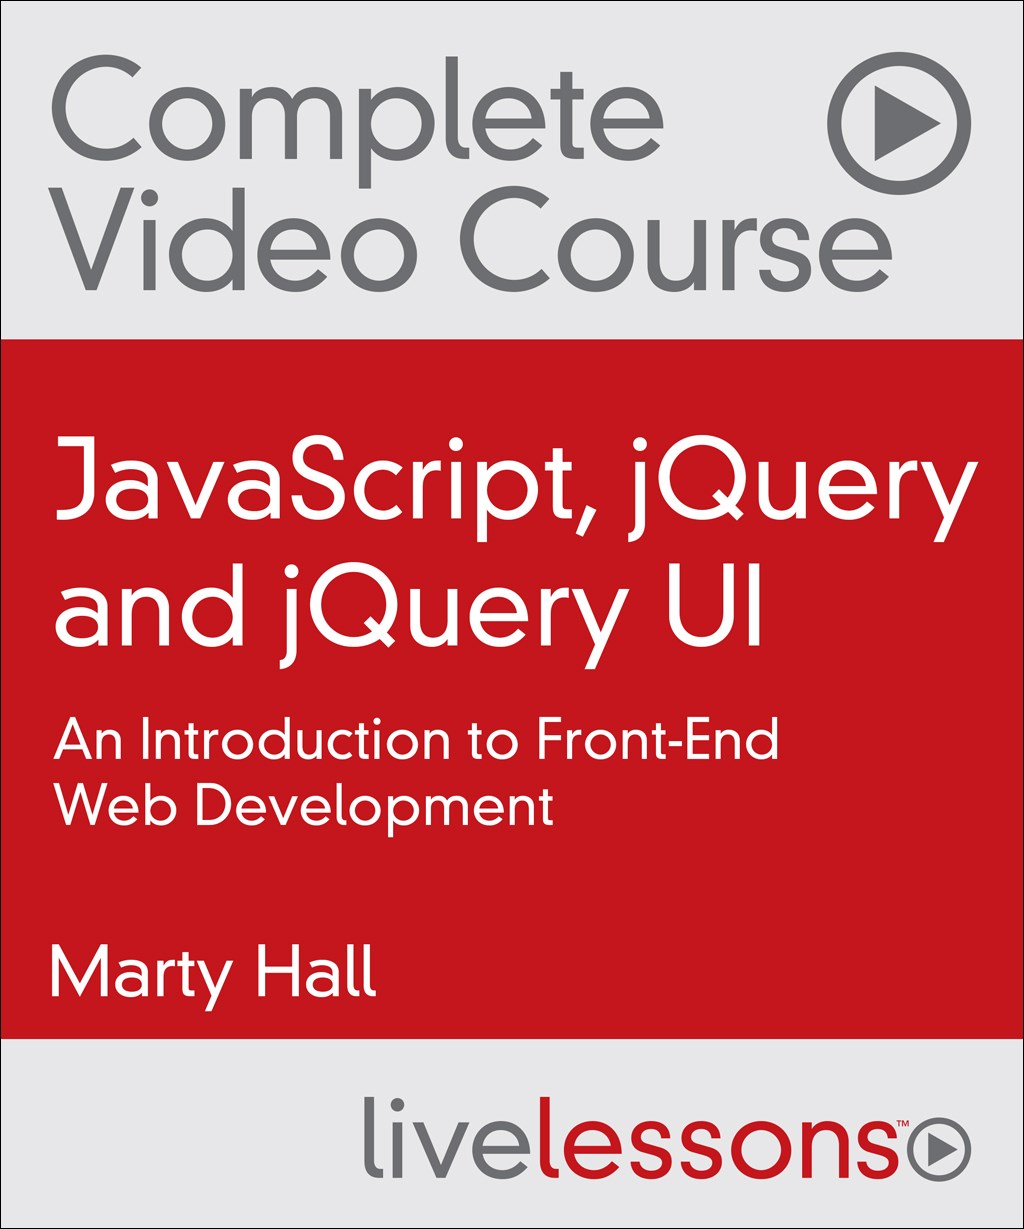 JavaScript, jQuery and jQuery UI Complete Video Course: An Introduction to Front-End Web Development